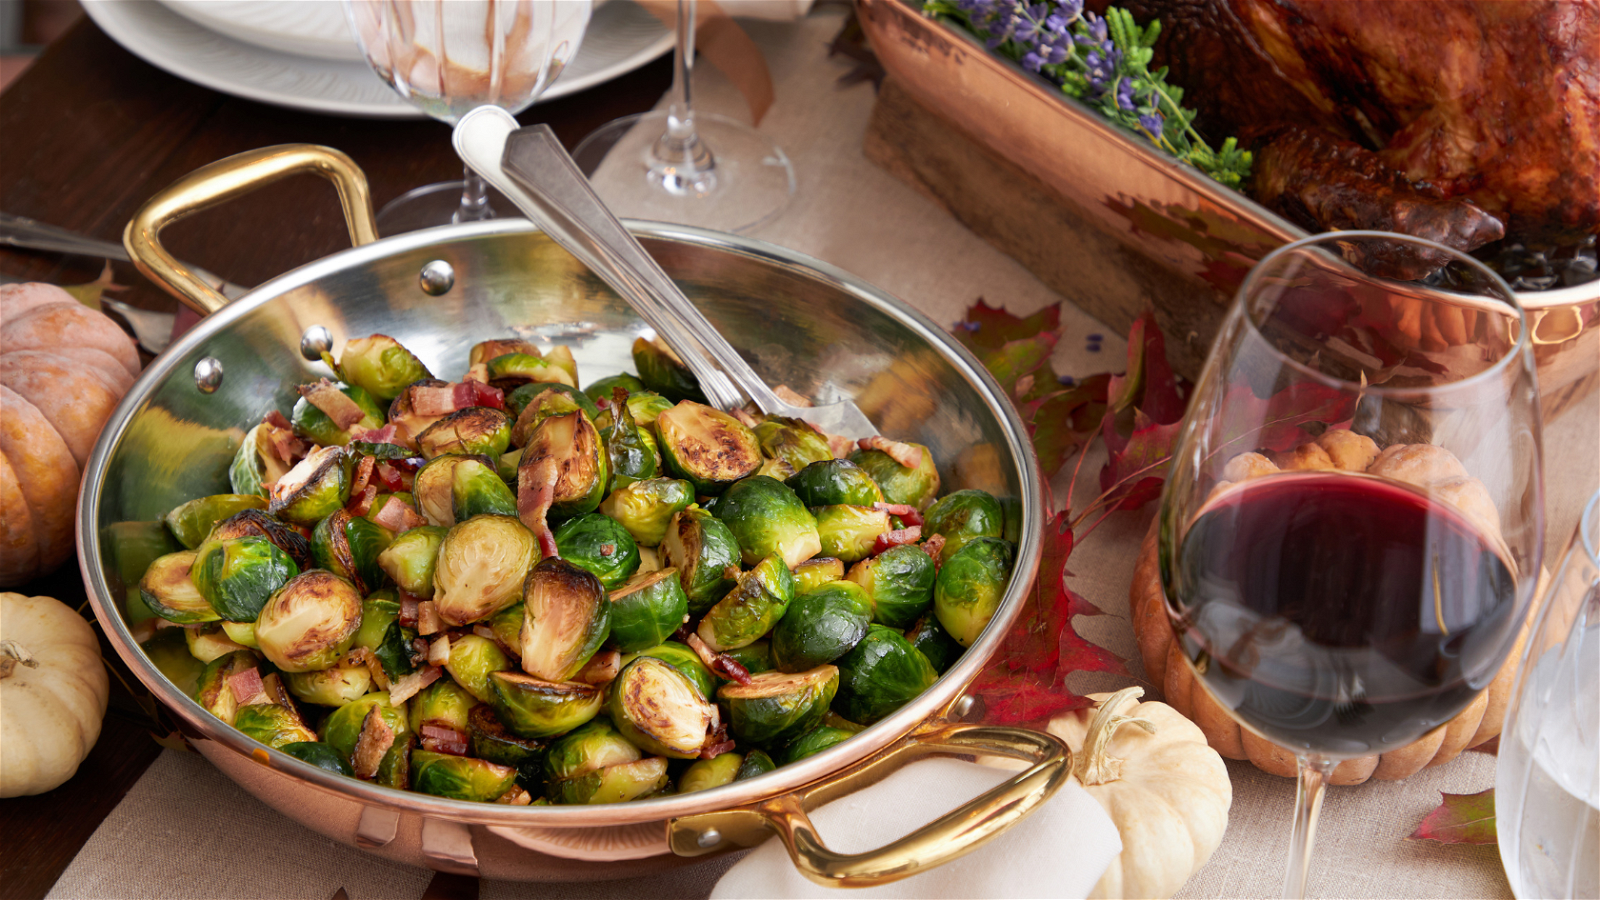 Image of Balsamic glazed brussels sprouts with bacon and Parmesan